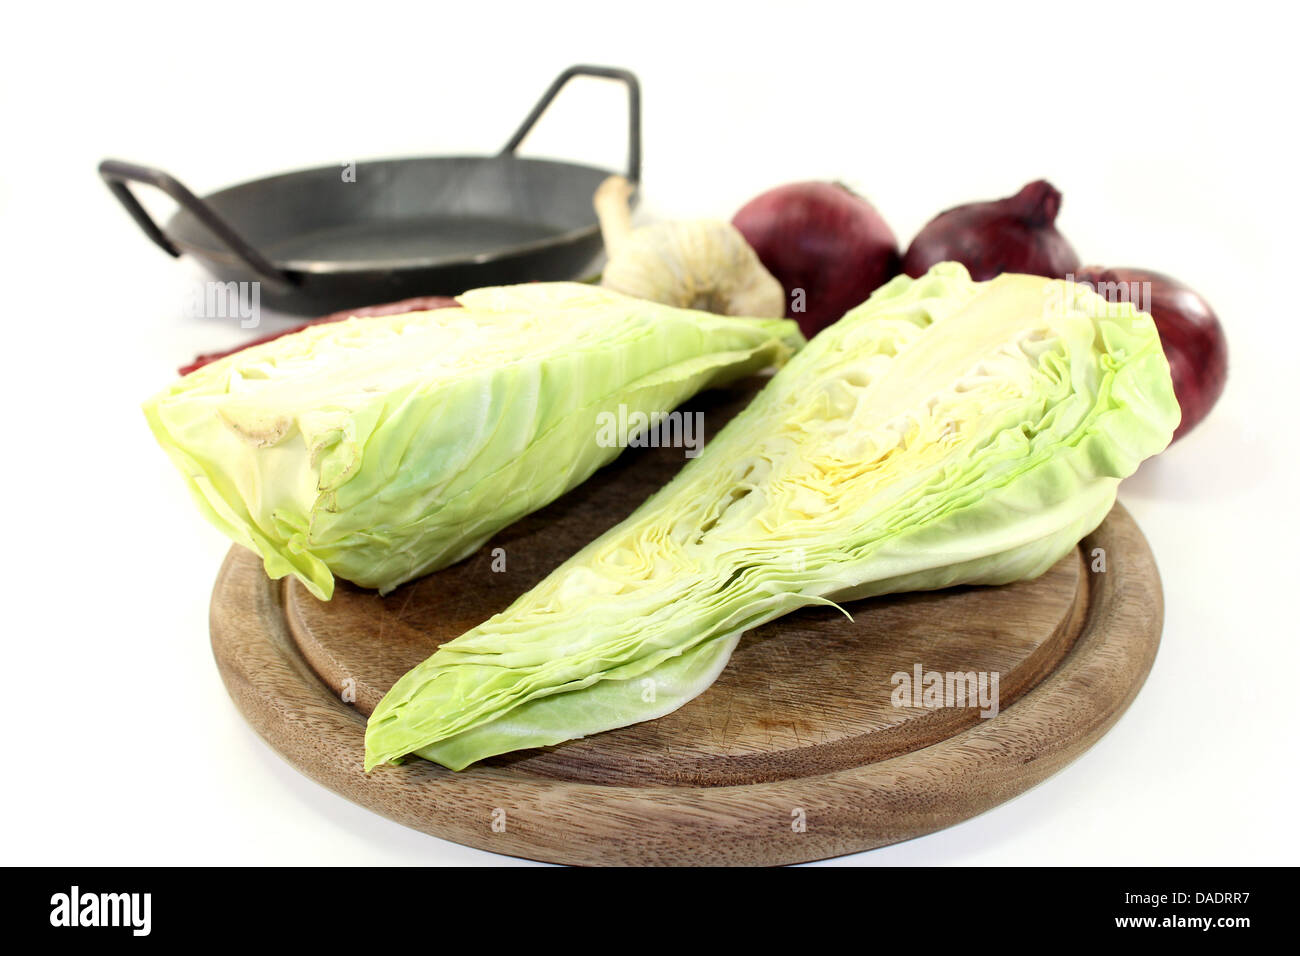 a sliced sweetheart cabbage on a wooden board Stock Photo